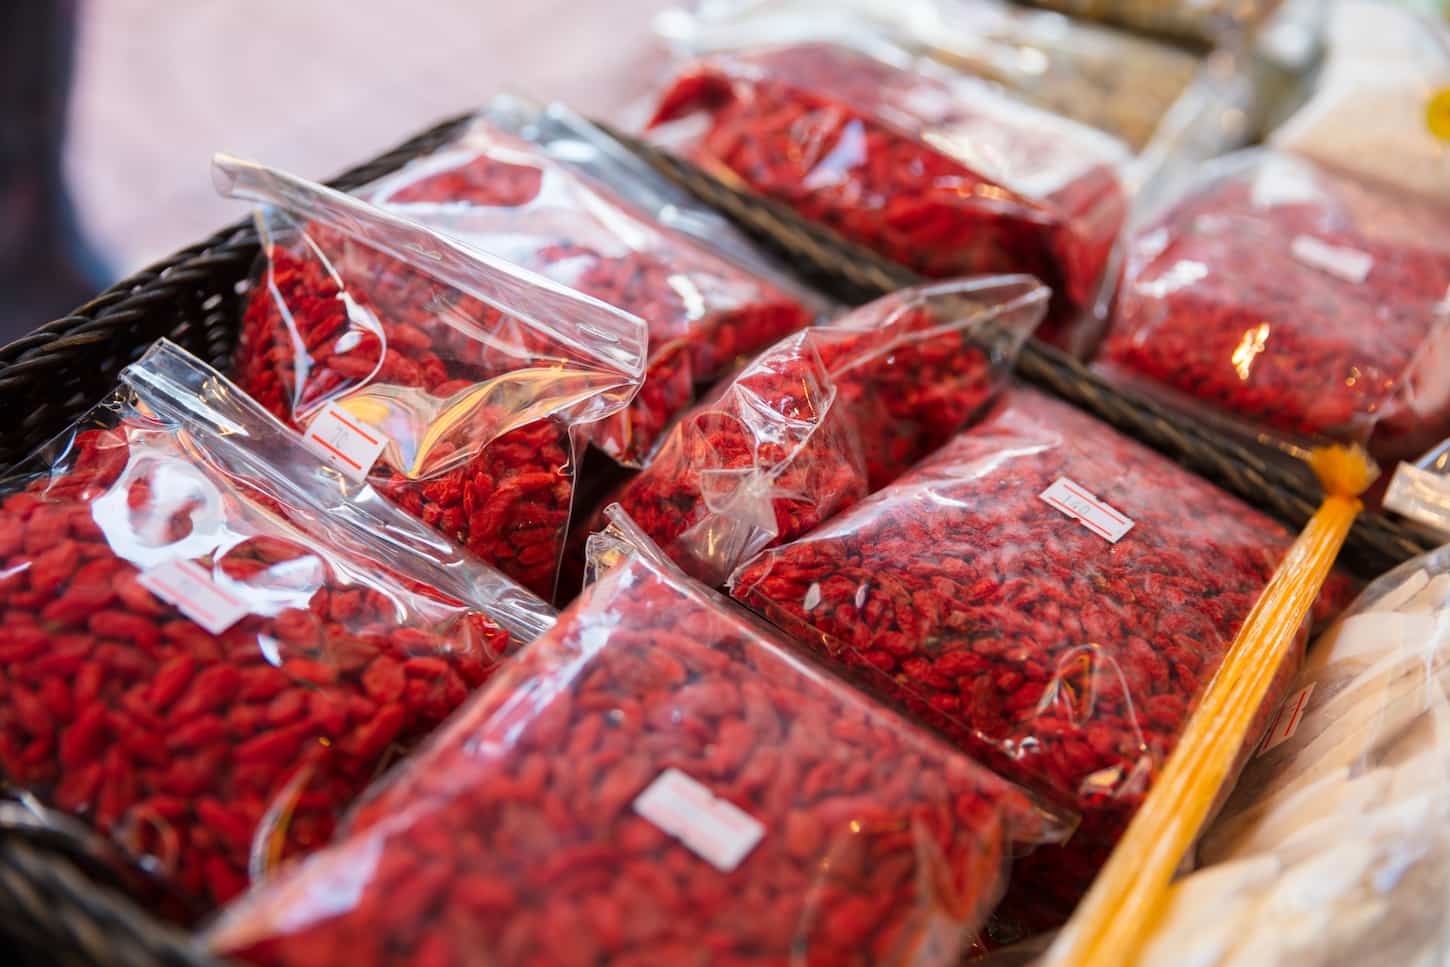 An image of Dried Goji Berries In Plastic Bags At a Local Market.